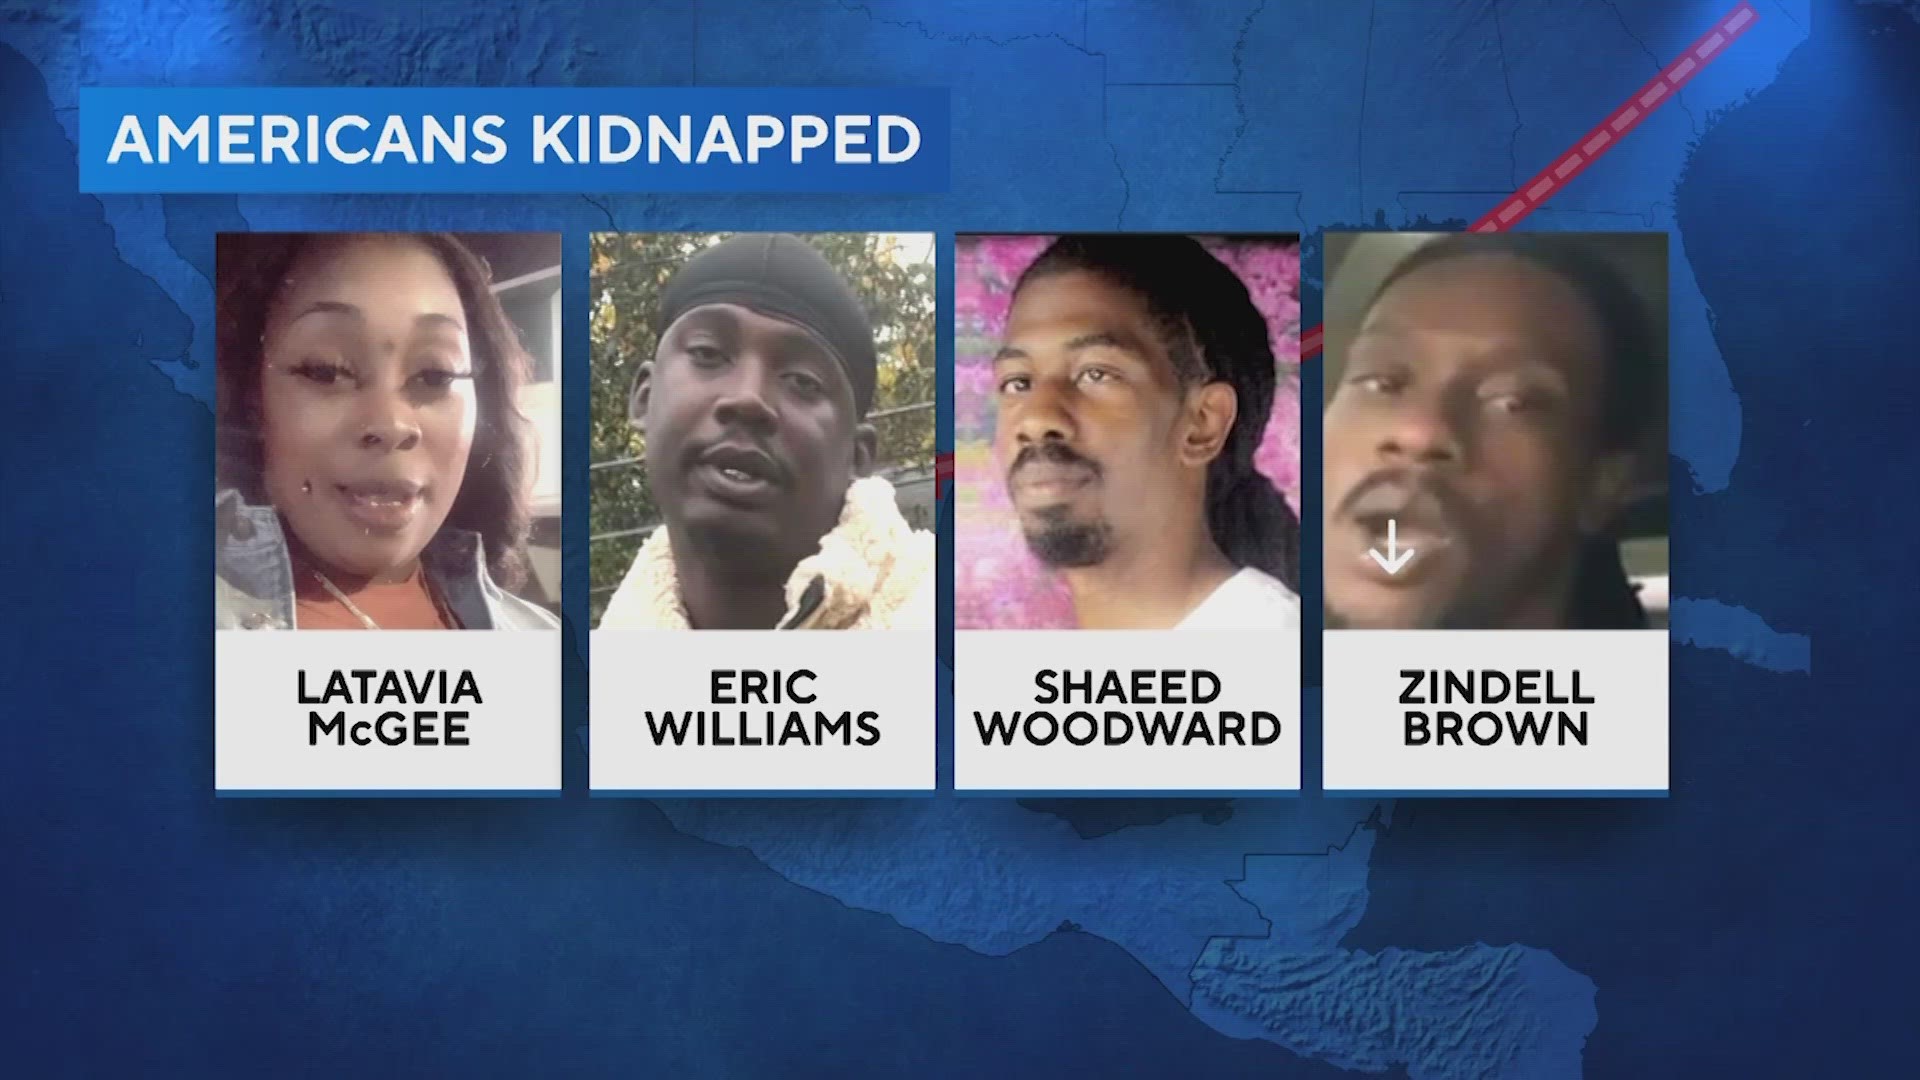 The U.S. State Department is vowing to track down the drug cartel that kidnapped four Americans in Mexico on Friday.